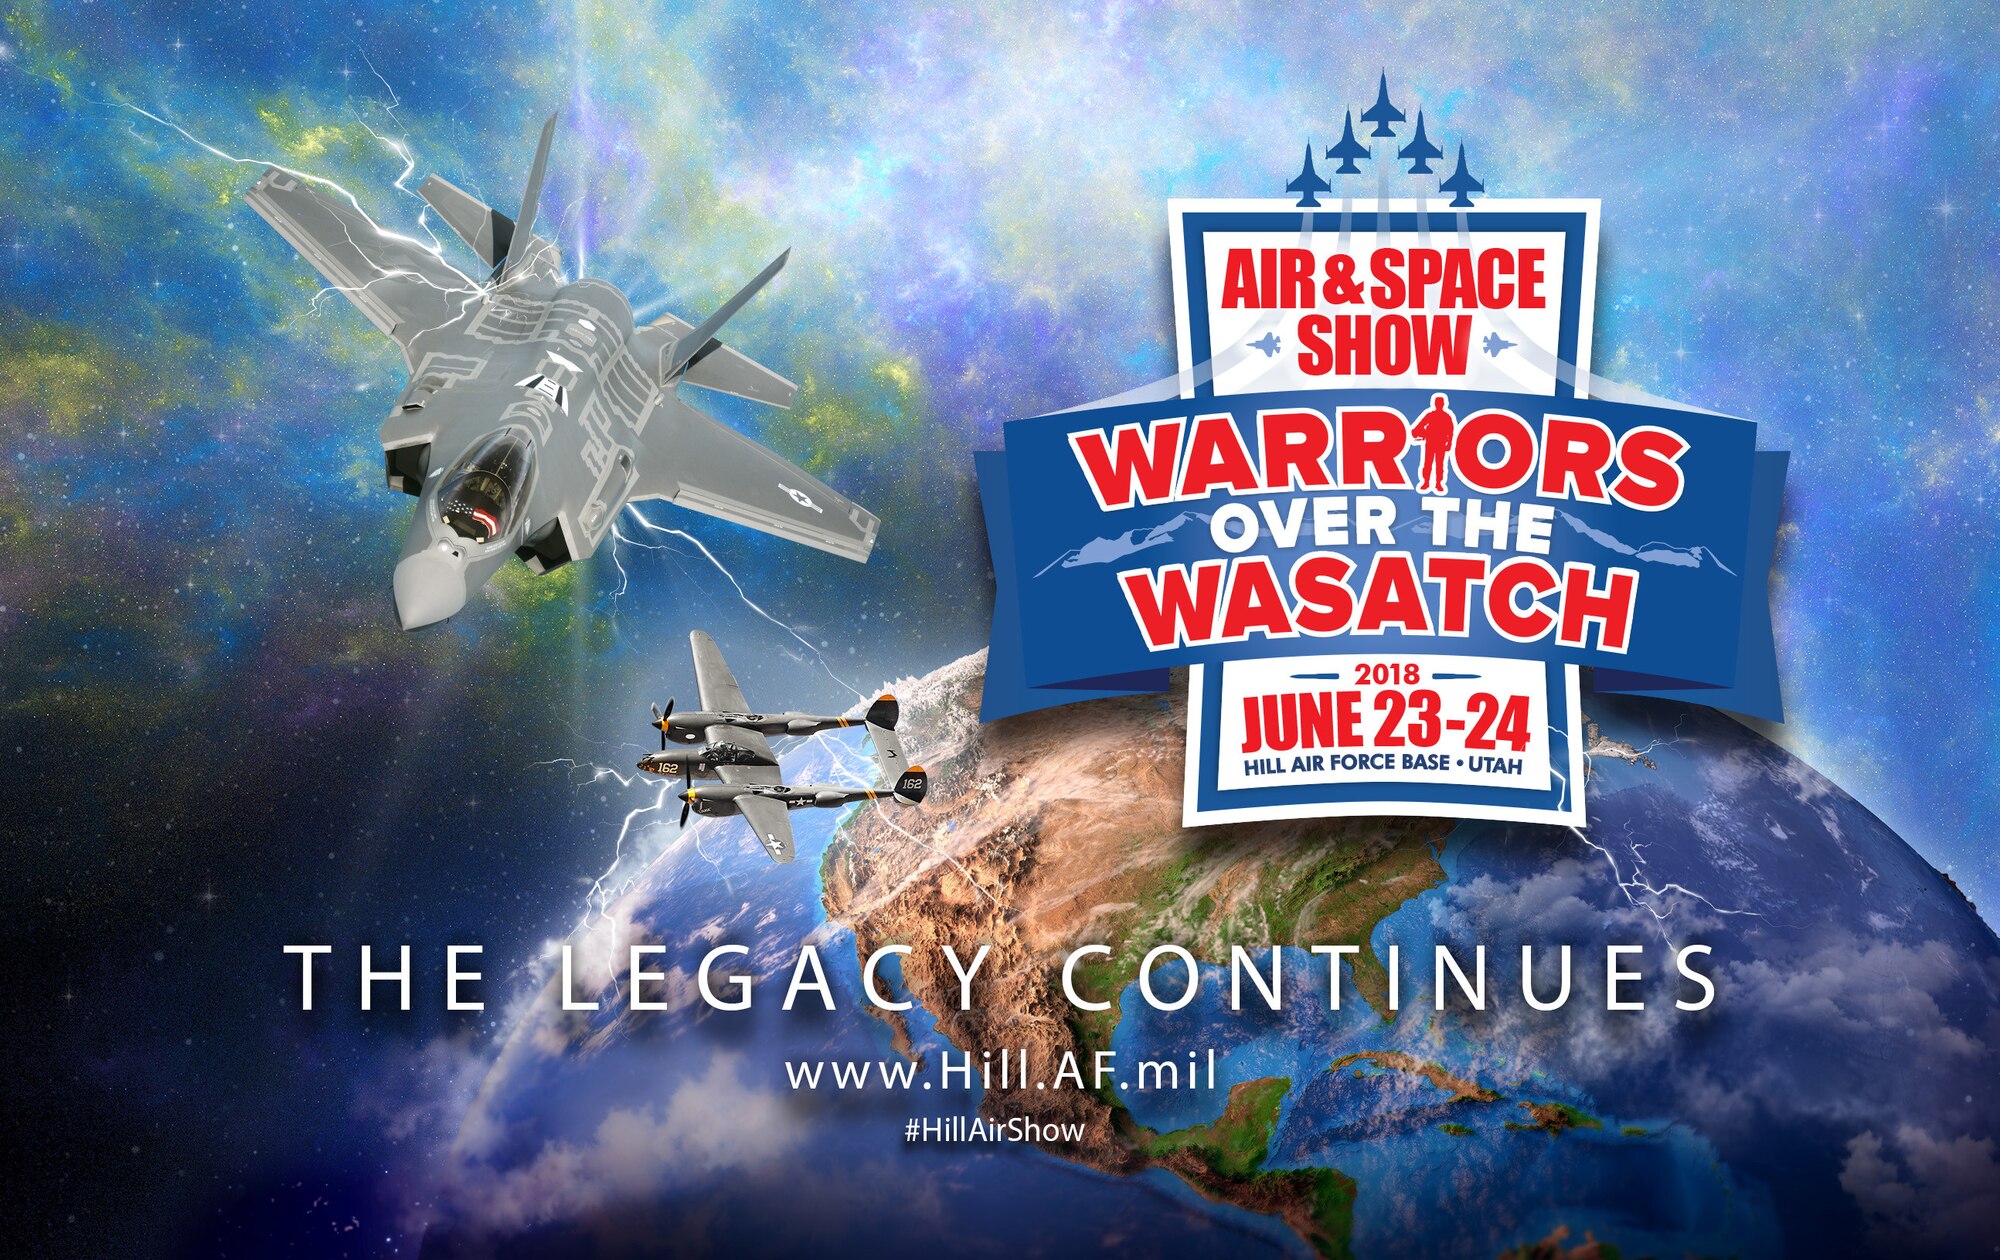 The Warriors Over the Wasatch: The Legacy Continues Air and Space Show is June 23-24, 2018. (U.S. Air Force graphic by David Perry)